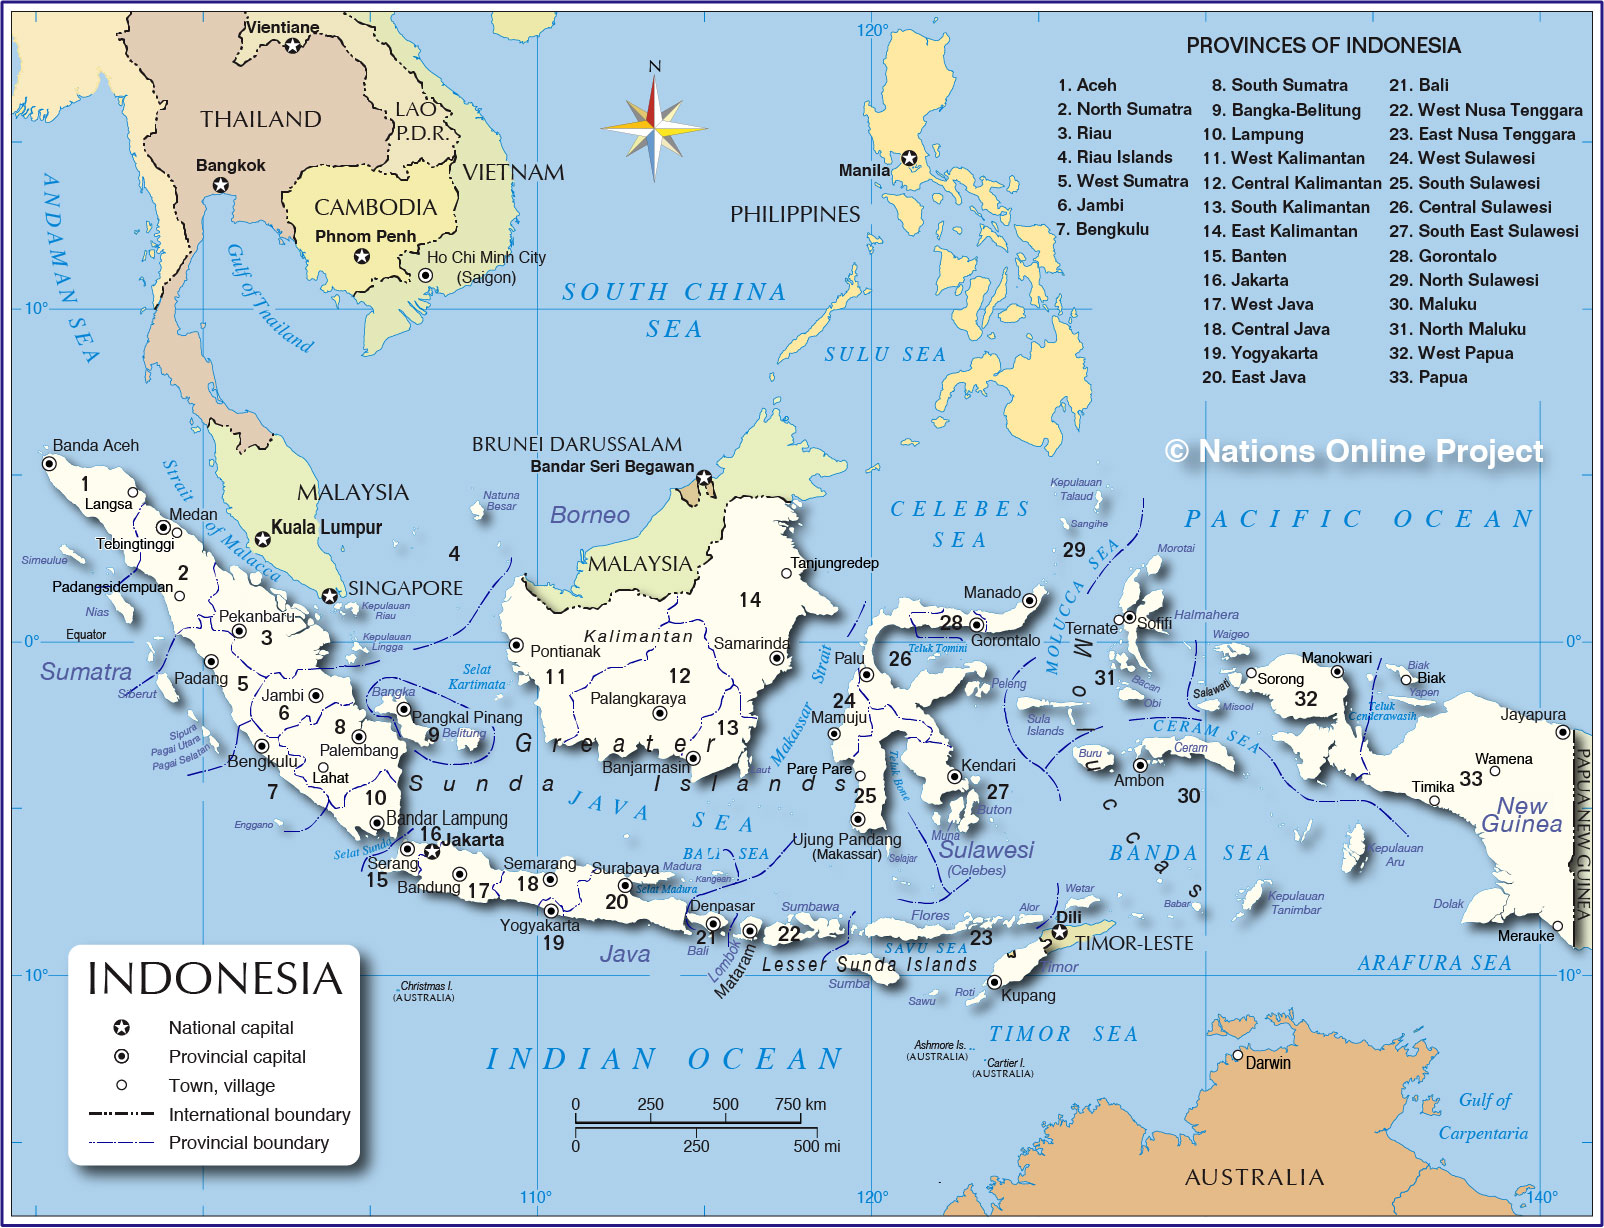 Administrative Map of Indonesia - Nations Online Project